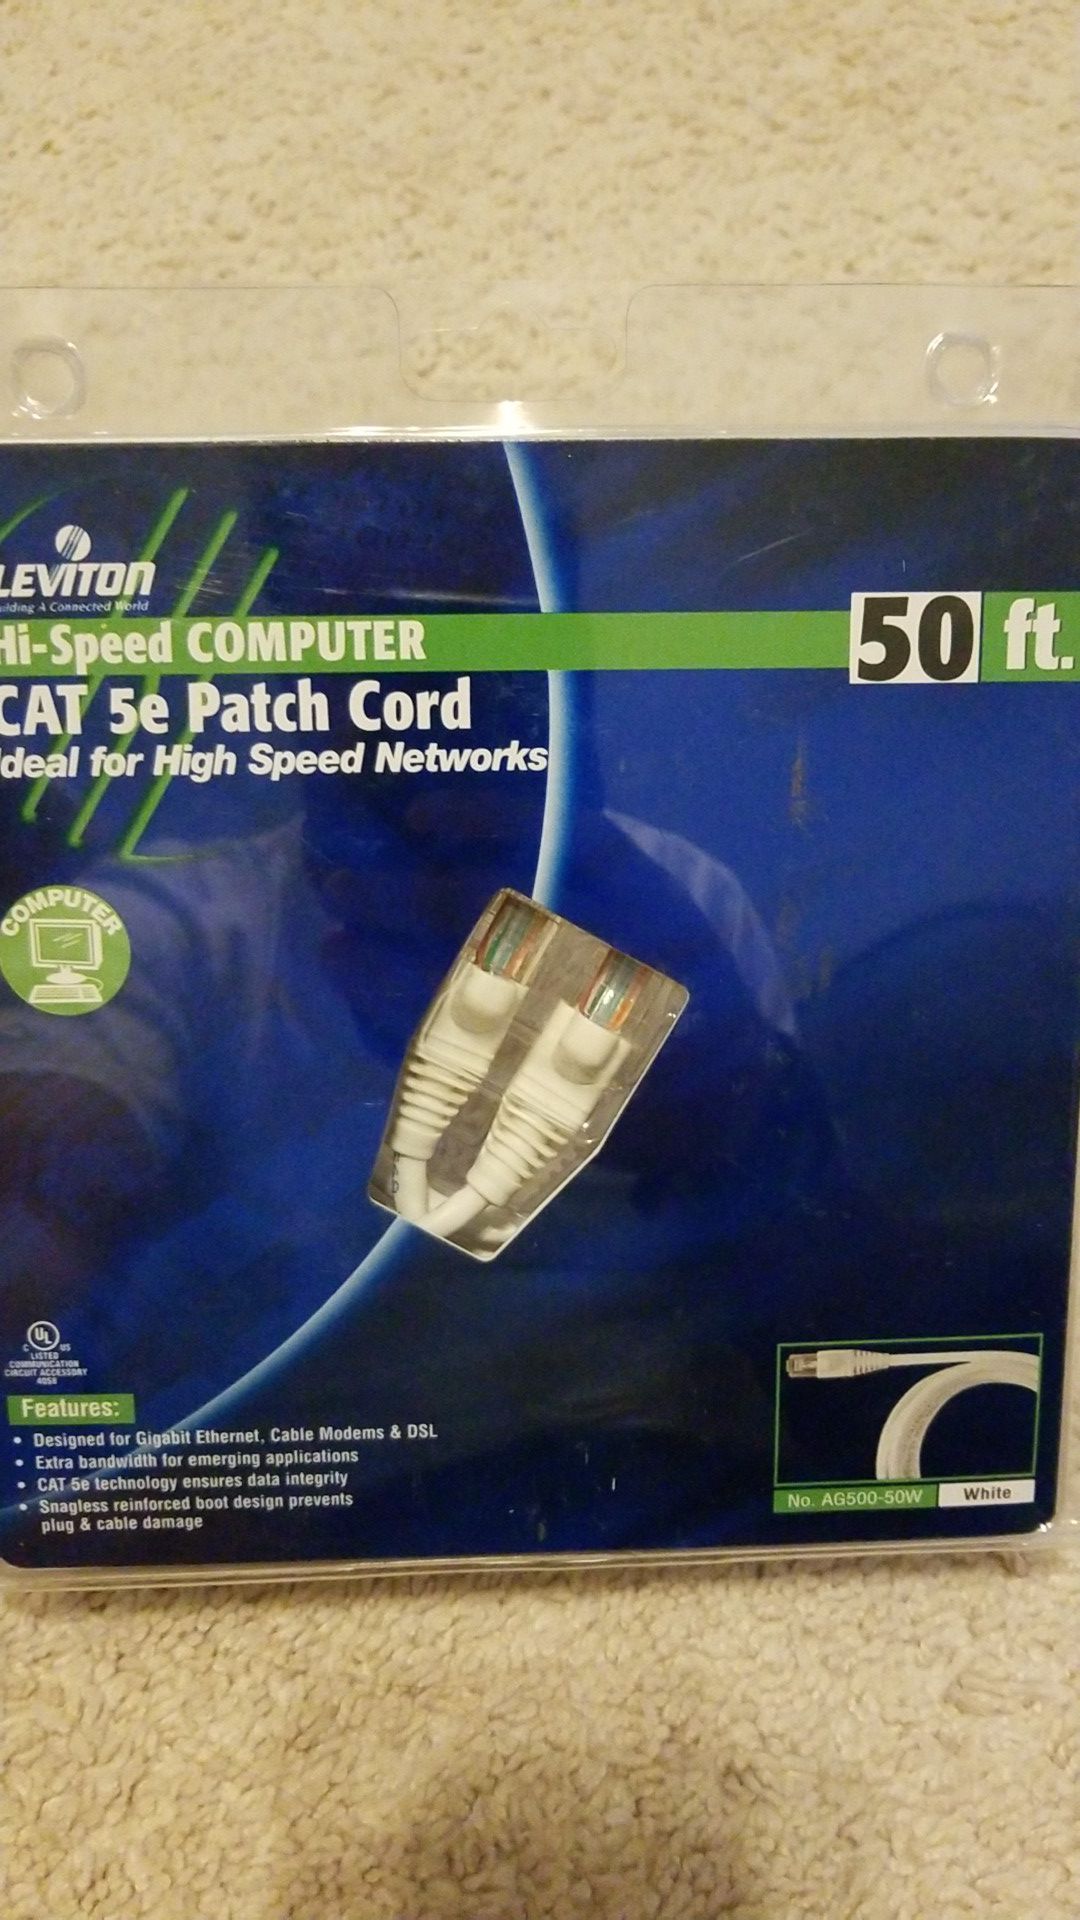 NEW - Hi-speed network CAT 5e patch cord